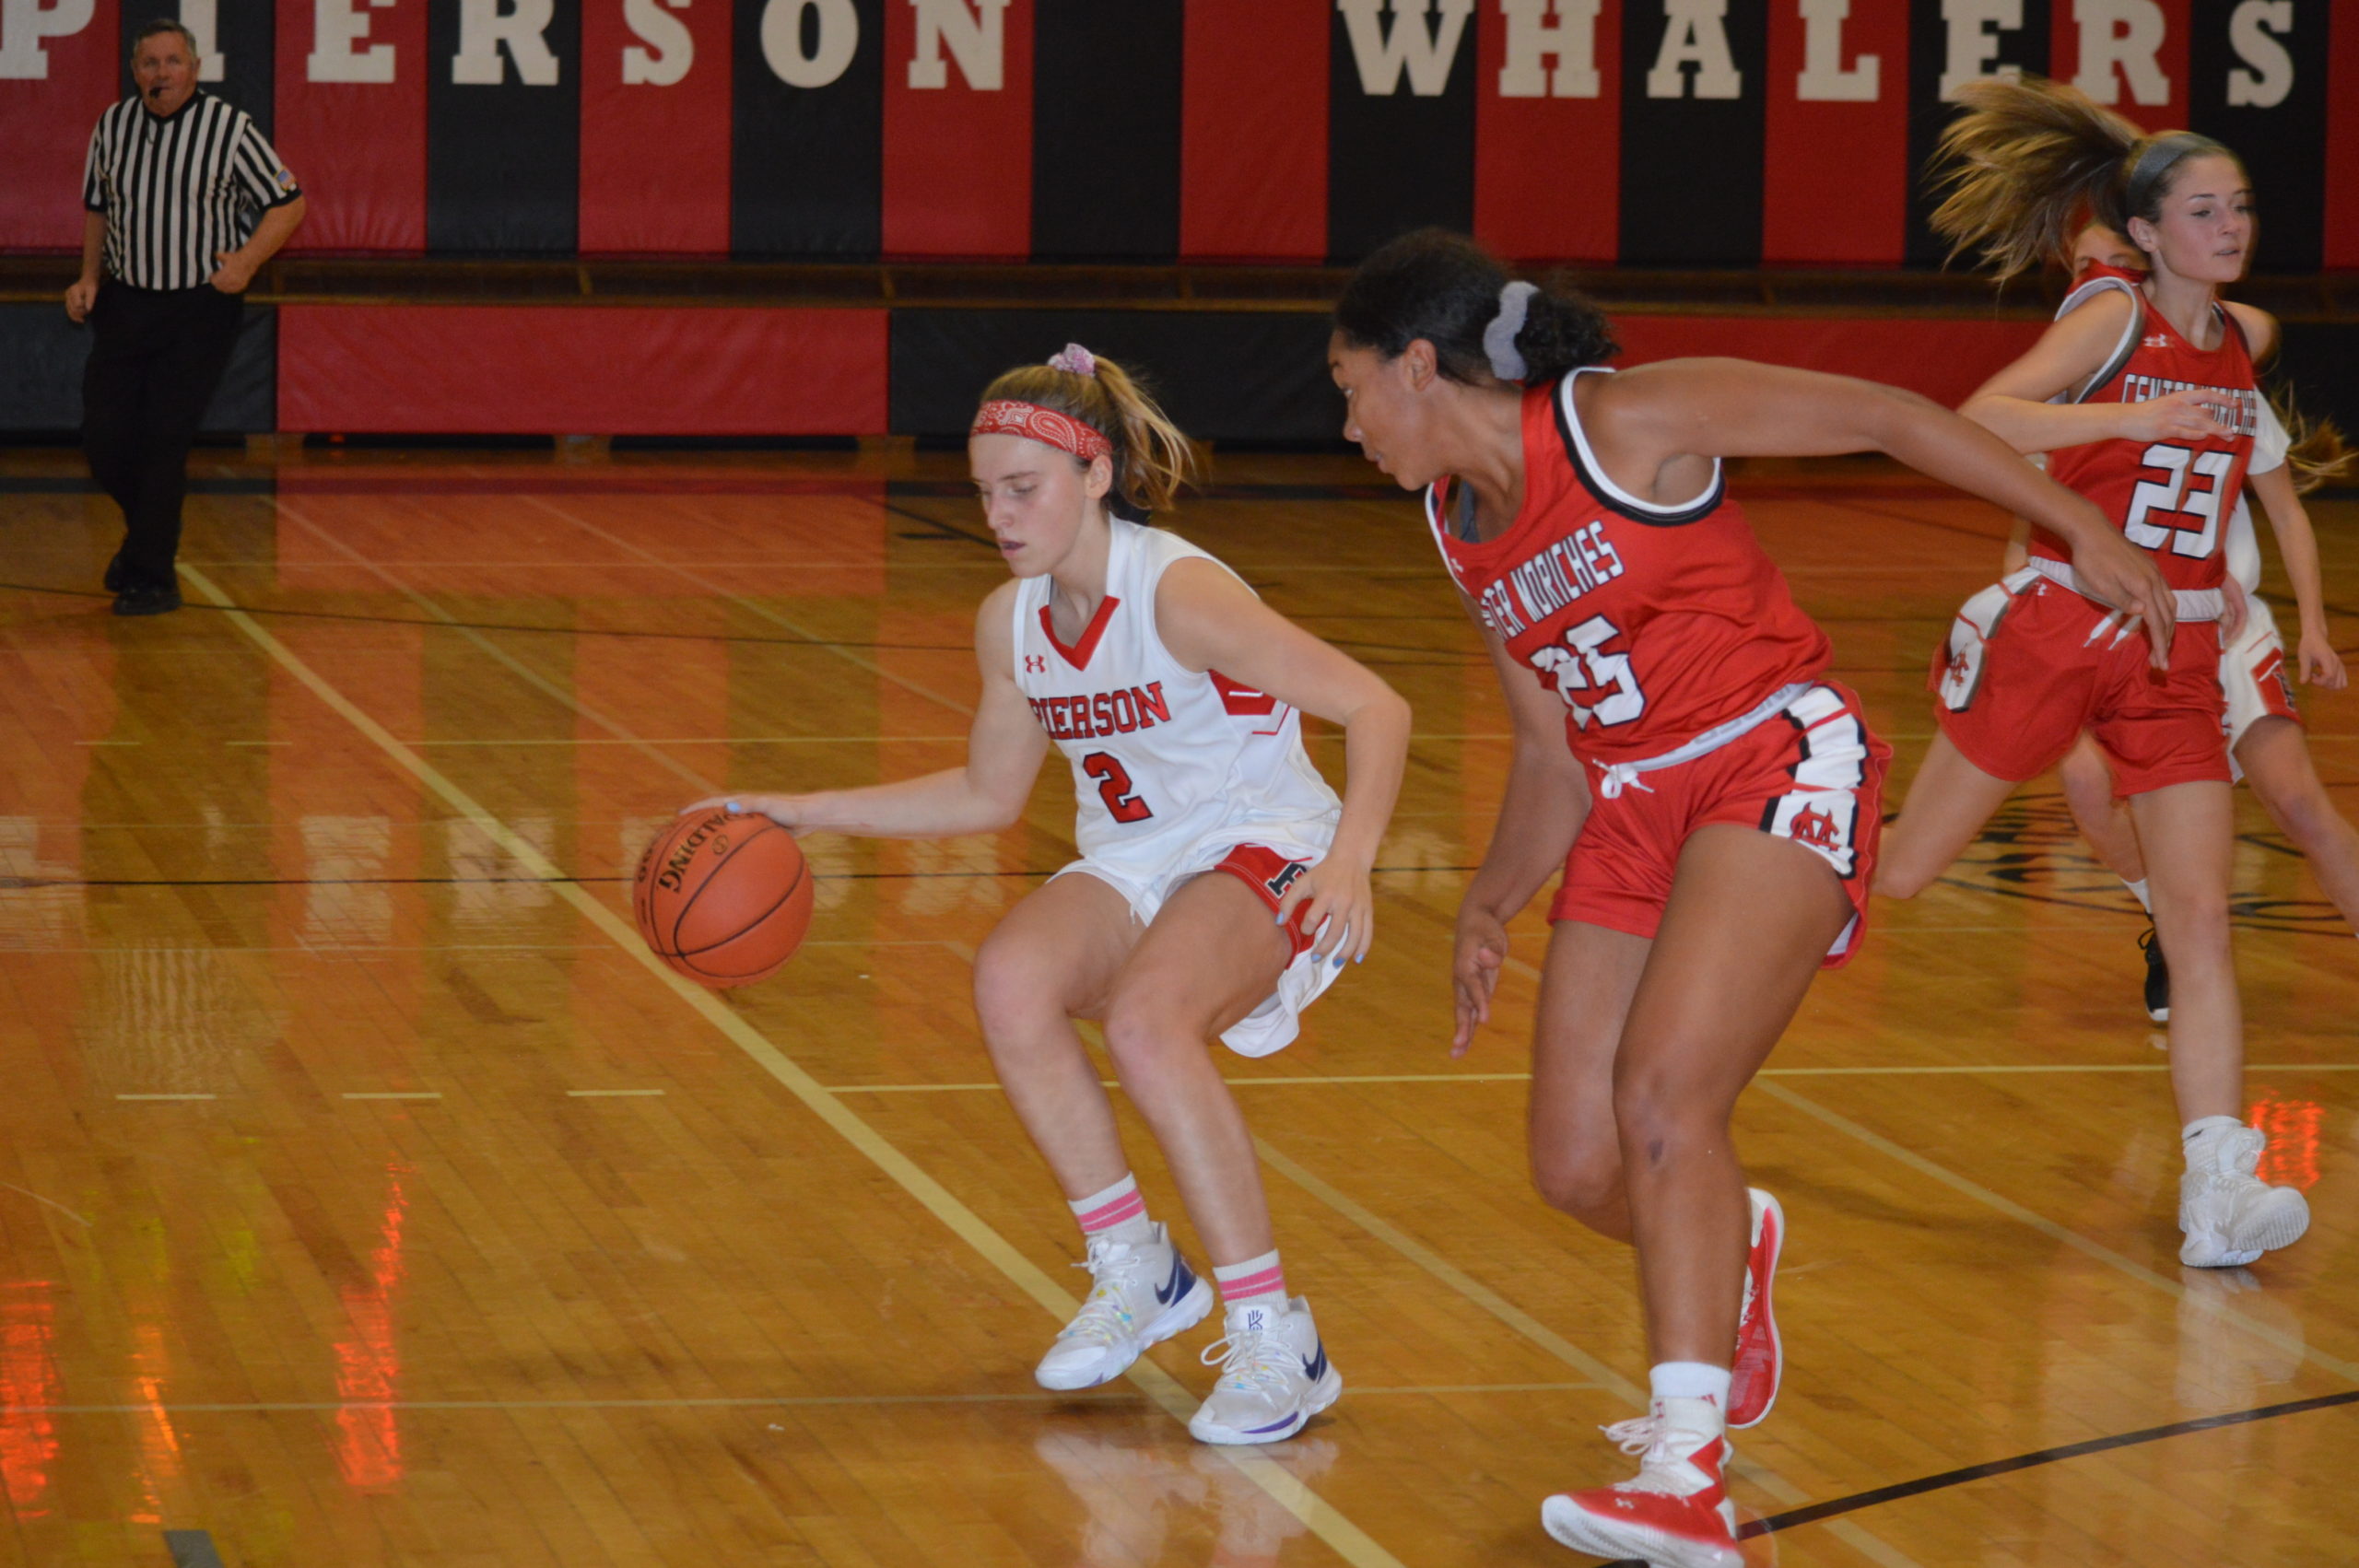 Pierson junior Grace Perello dribbling out of trouble against Center Moriches.